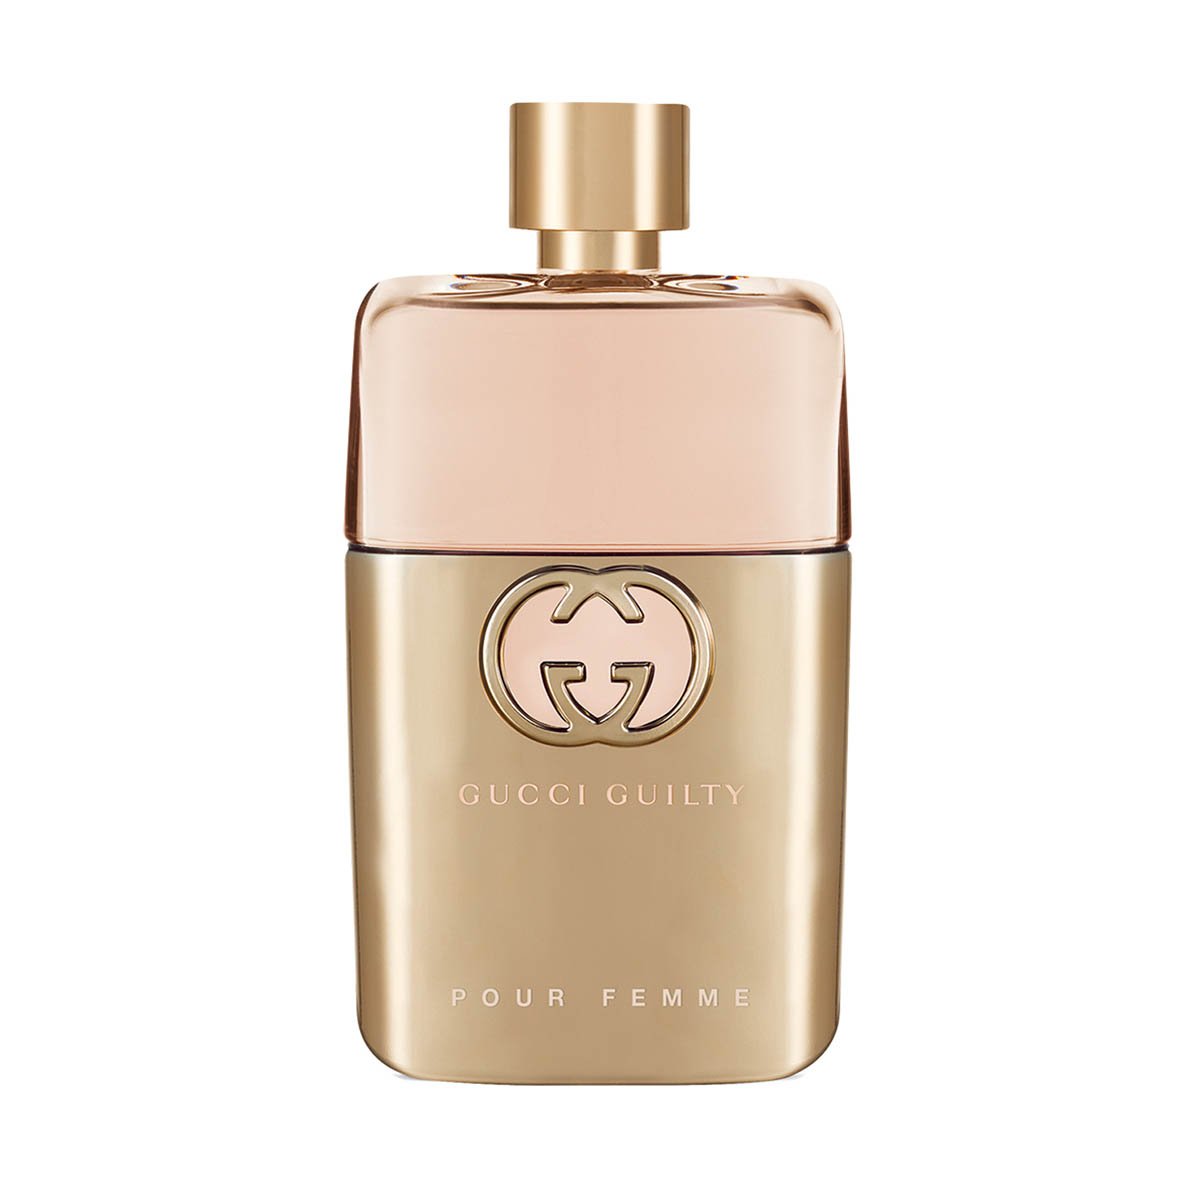 Fragancia para Mujer Gucci Guilty For Her Edp 90 Ml